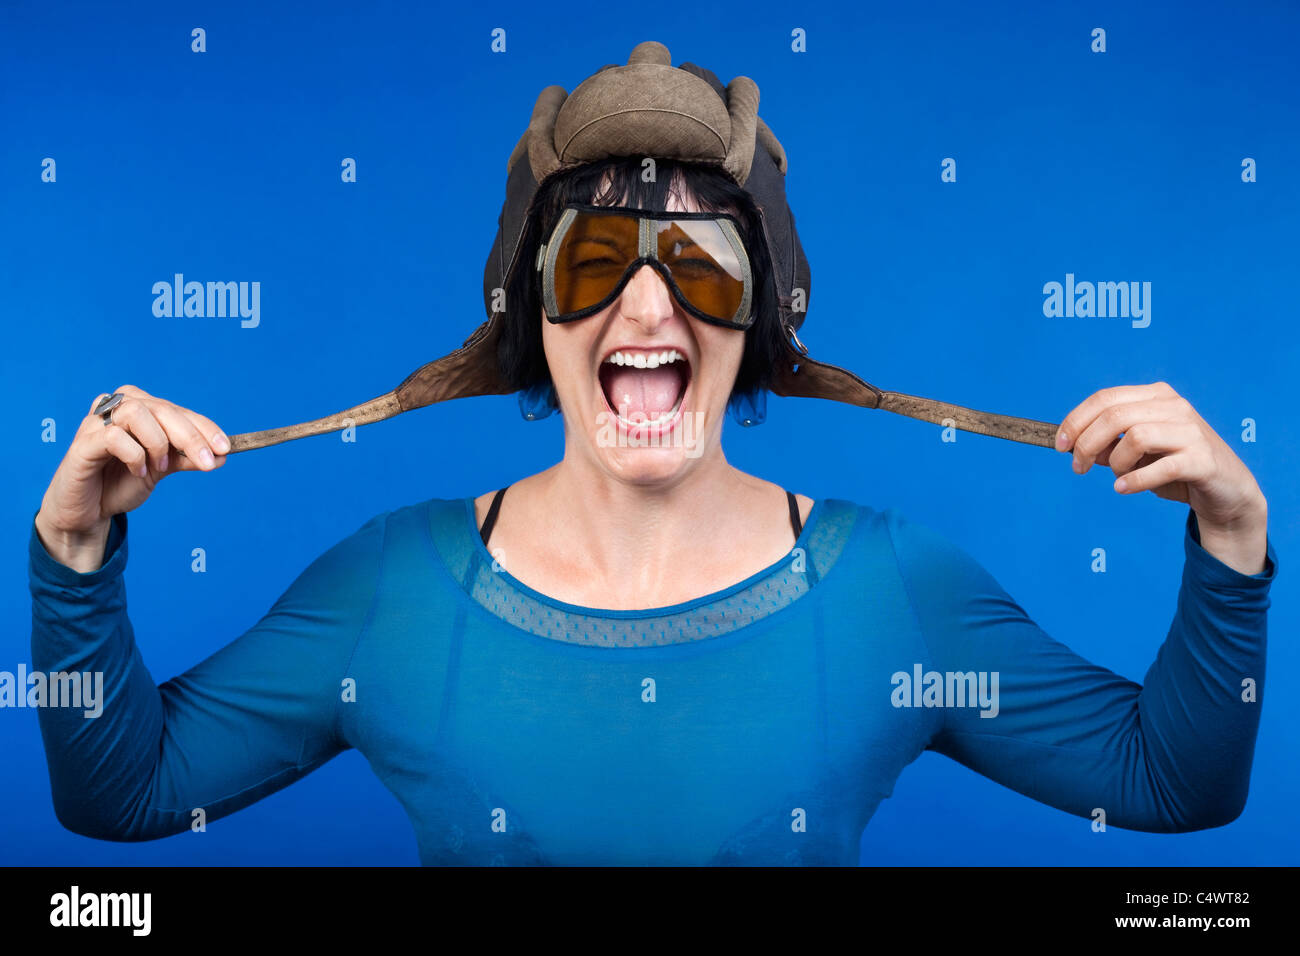 woman with old army tank personal helmet, laughing - isolated on blue Stock Photo